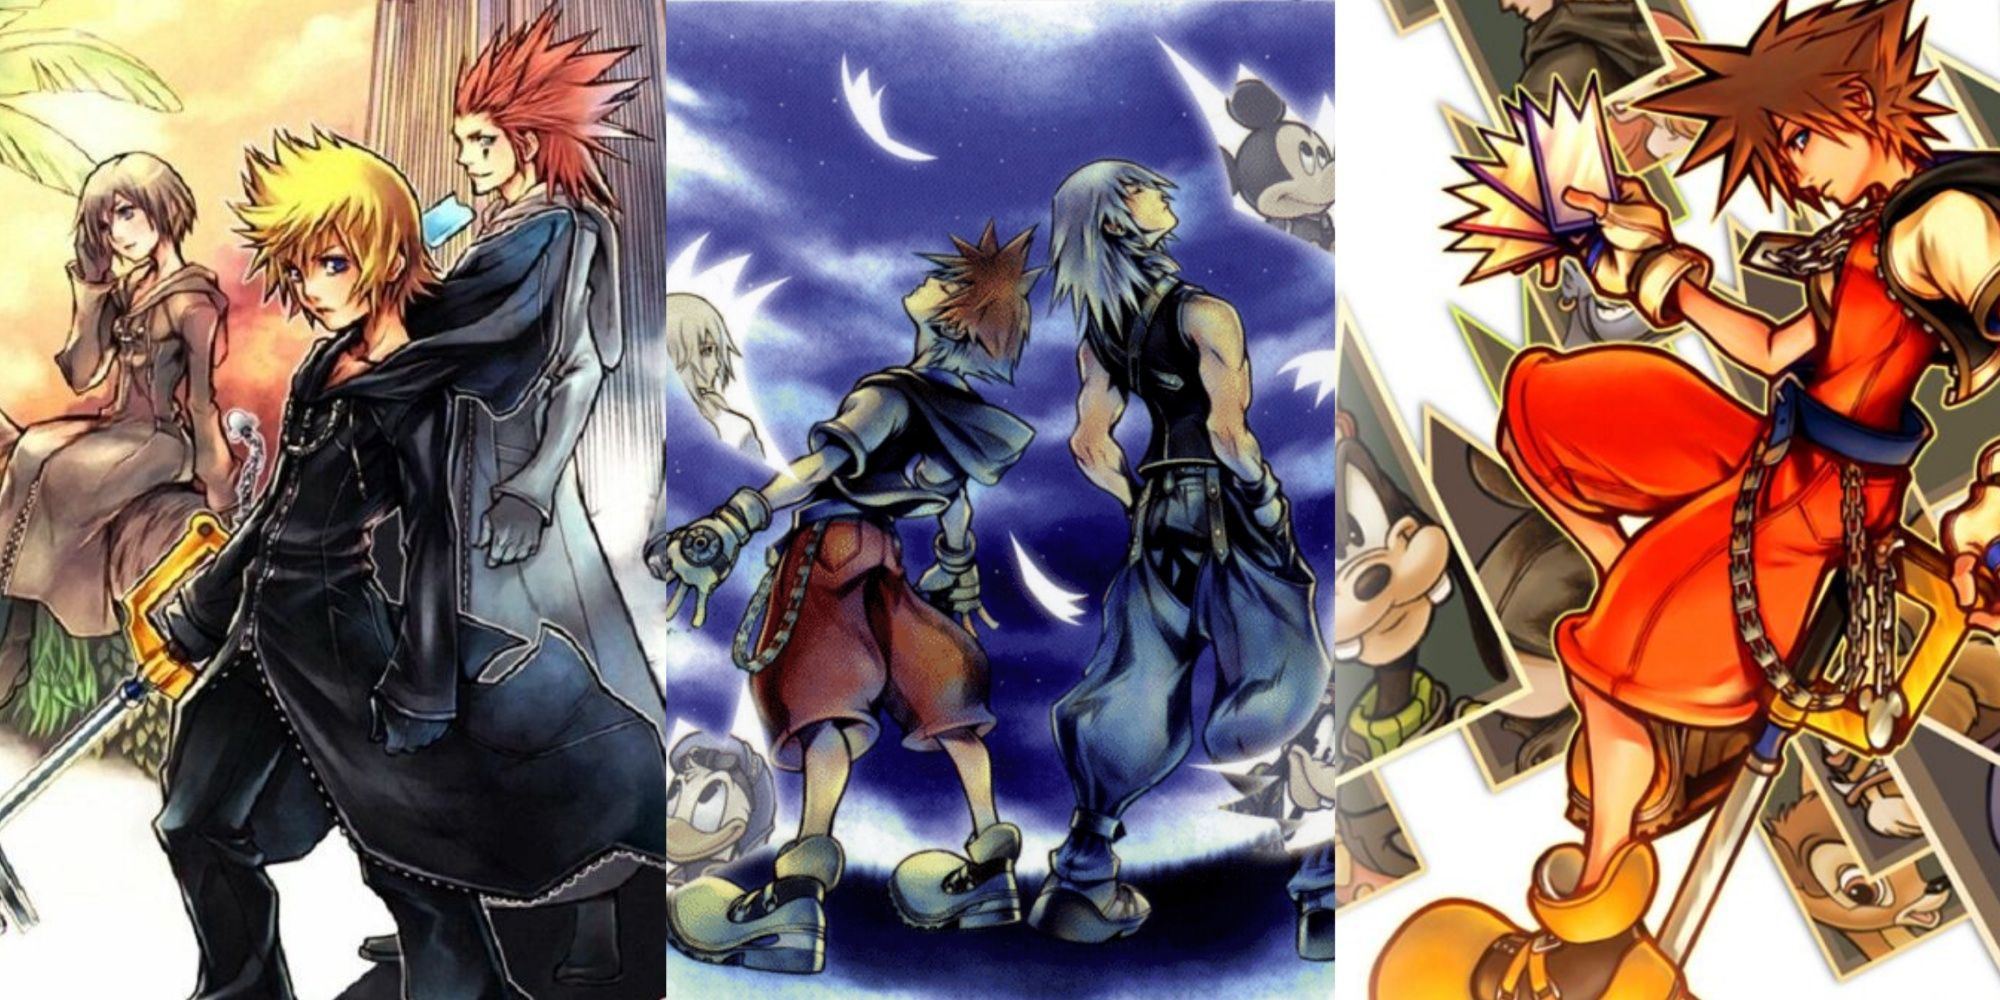 Split images of the box art for Kingdom Hearts 358 2 Days, Dream Drop Distance, and Chain of Memories